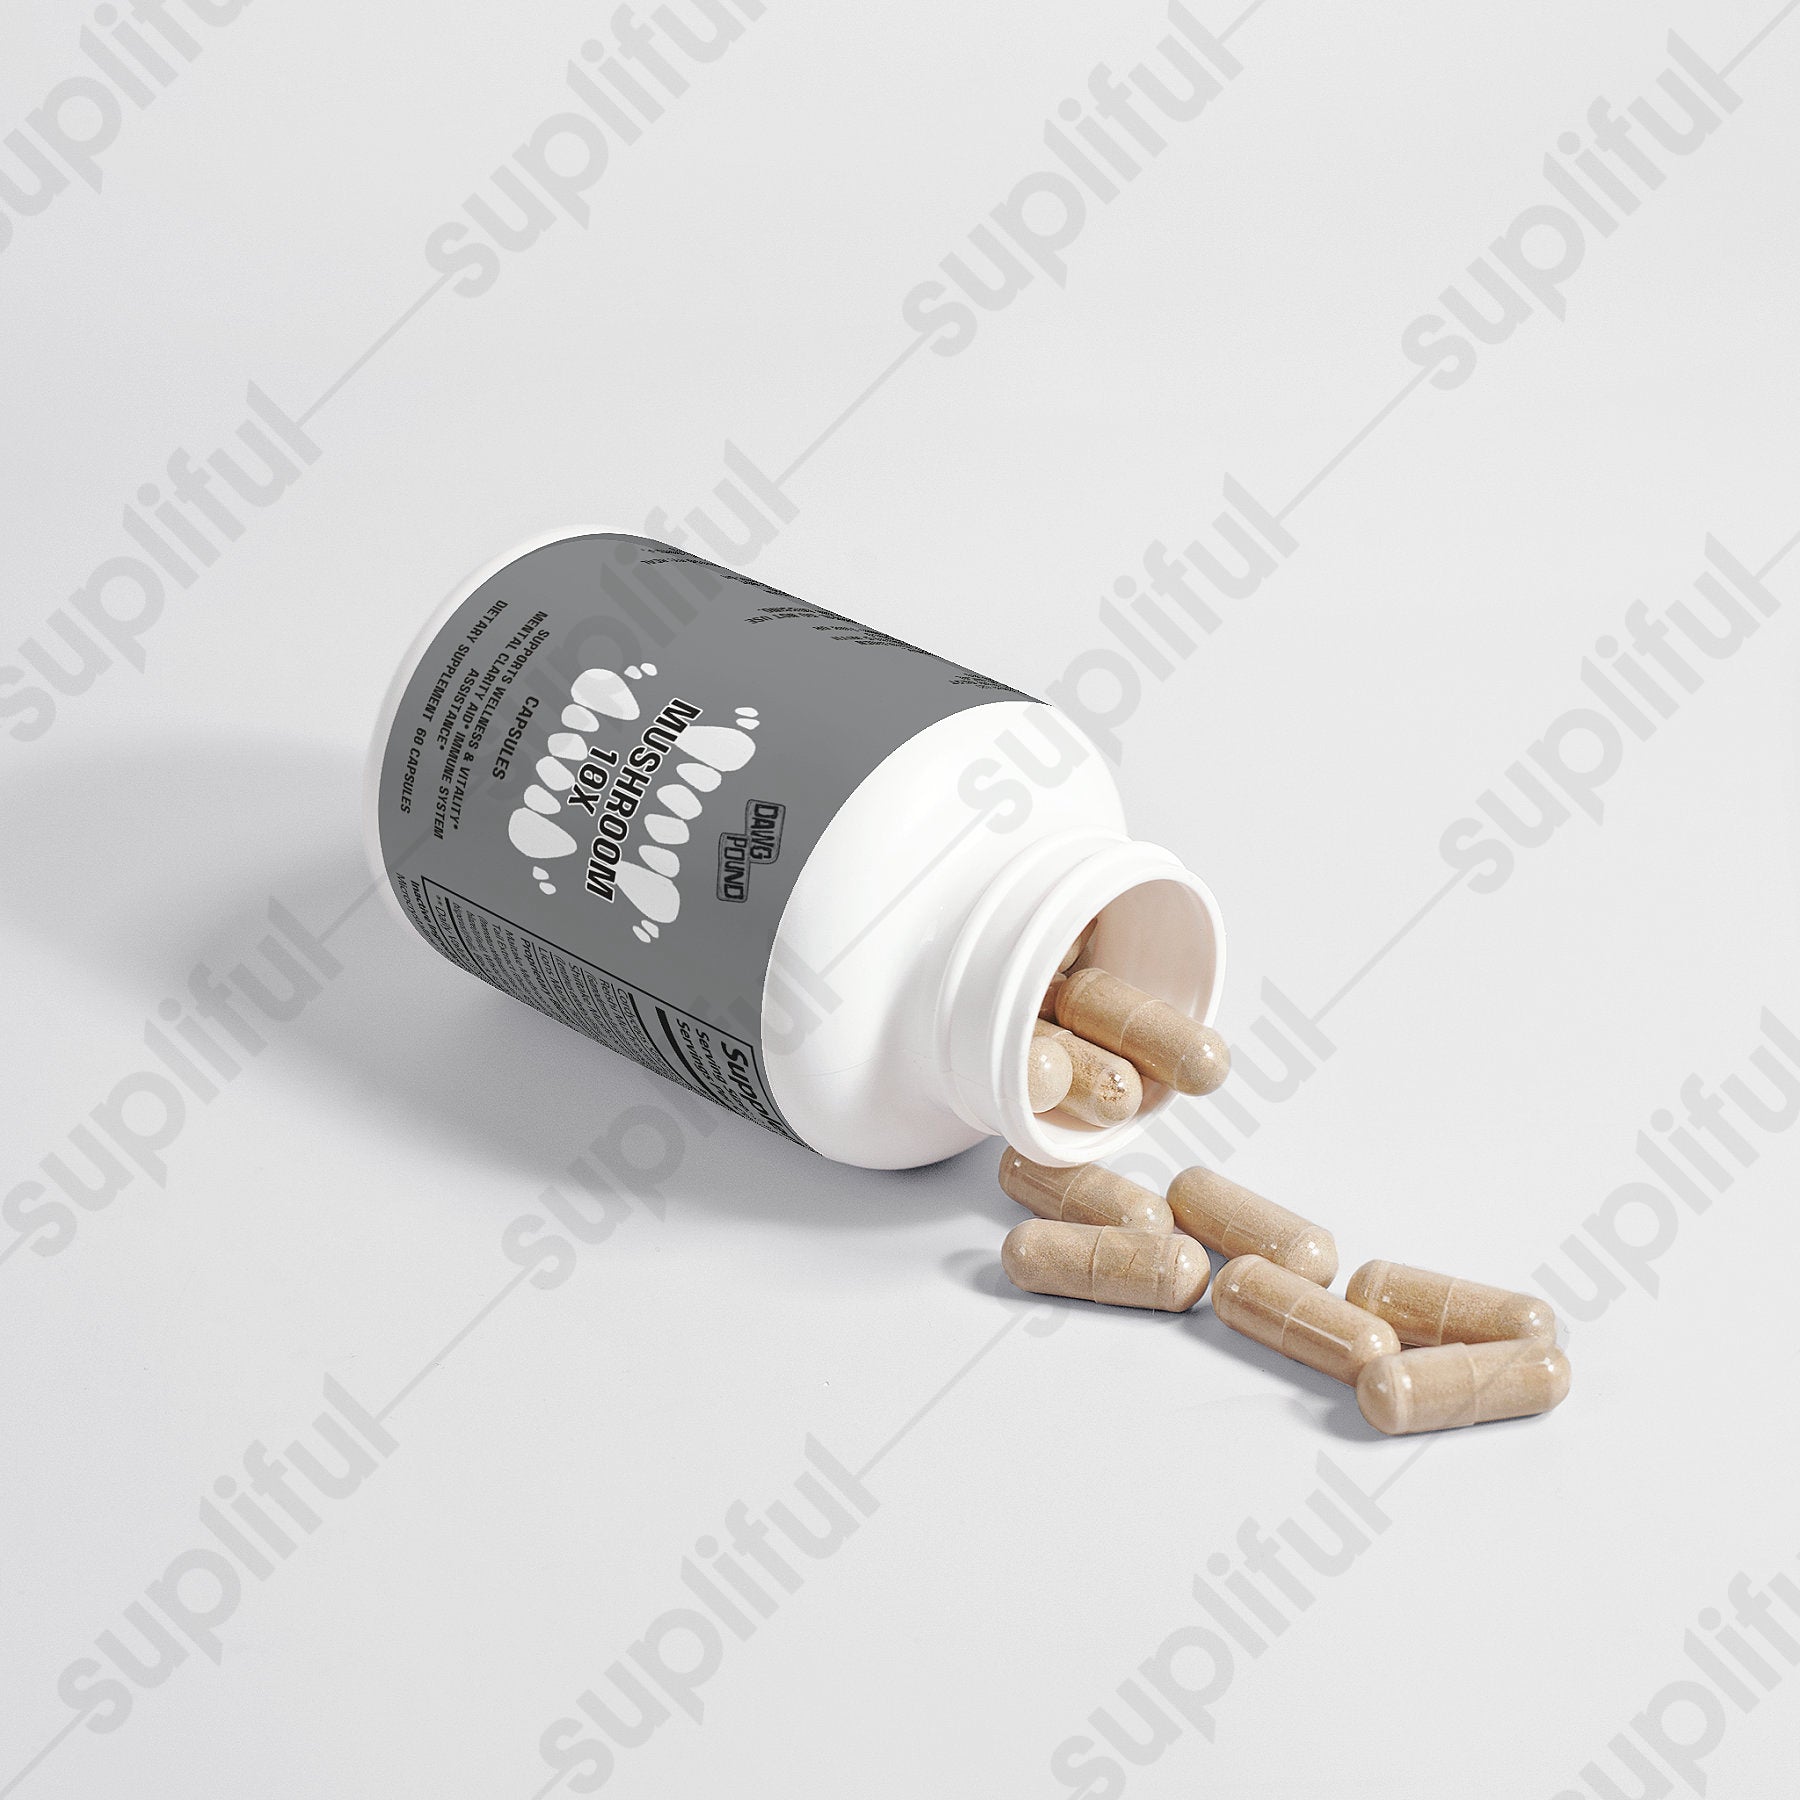 Dawg Pound Mushroom 10 X Supplement Capsules- Opened Bottle with Capsules Flowing Out